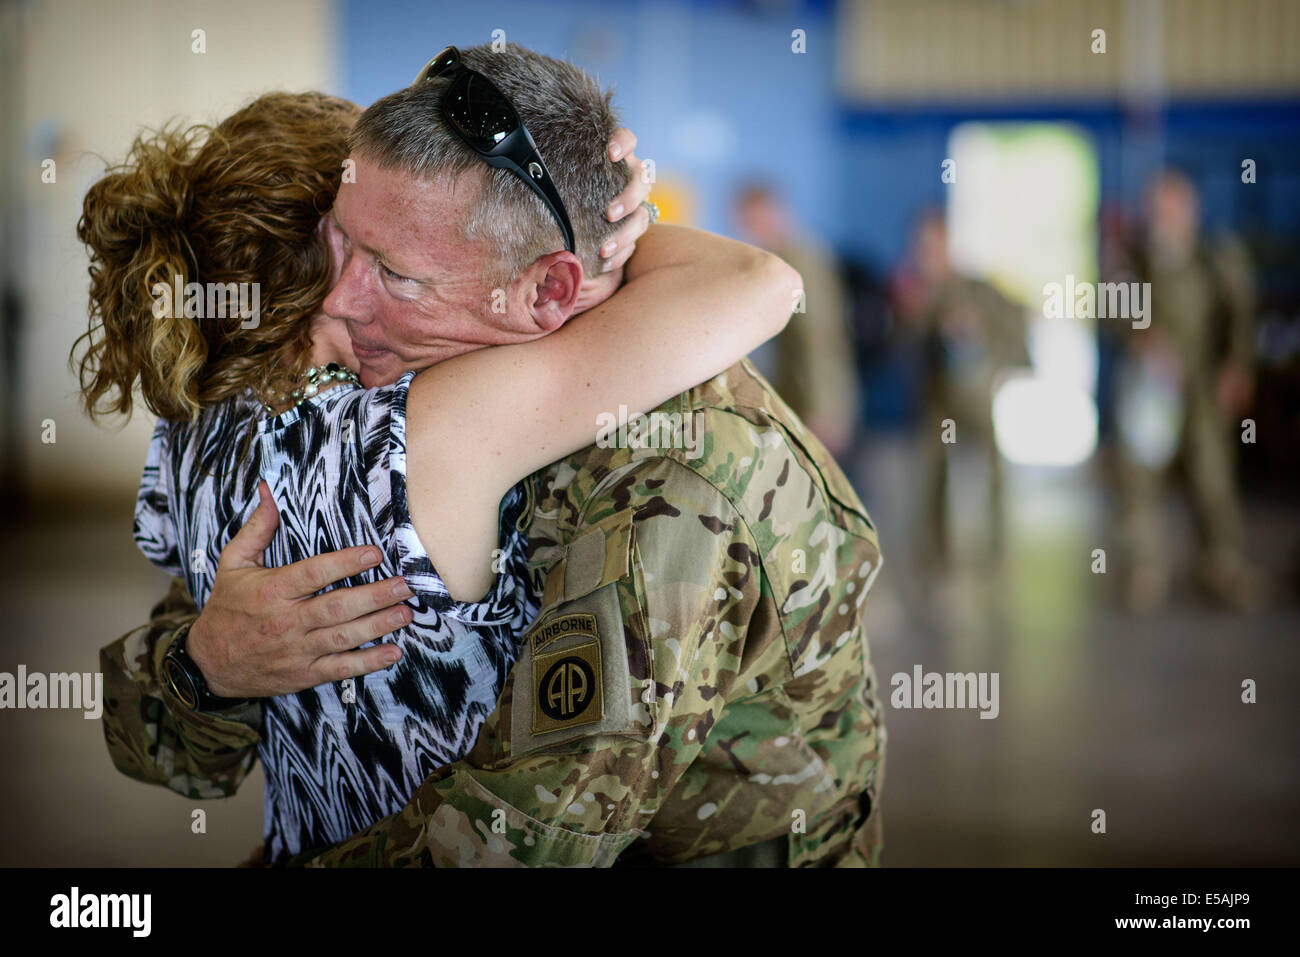 July 24, 2014 - Fort Bragg, NC, USA - July 24, 2014 - Fort Bragg, N.C., USA - Chief Warrant Officer Charles Ray hugs his wife, Jamie, Thursday, July 24, 2014, on Fort Bragg, N.C., before he and his fellow soldiers from Company C, 3rd General Support Aviation Battalion, 82nd Combat Aviation Brigade, deploy to Afghanistan for nine months. (Credit Image: © Andrew Craft/ZUMA Wire/ZUMAPRESS.com) Stock Photo